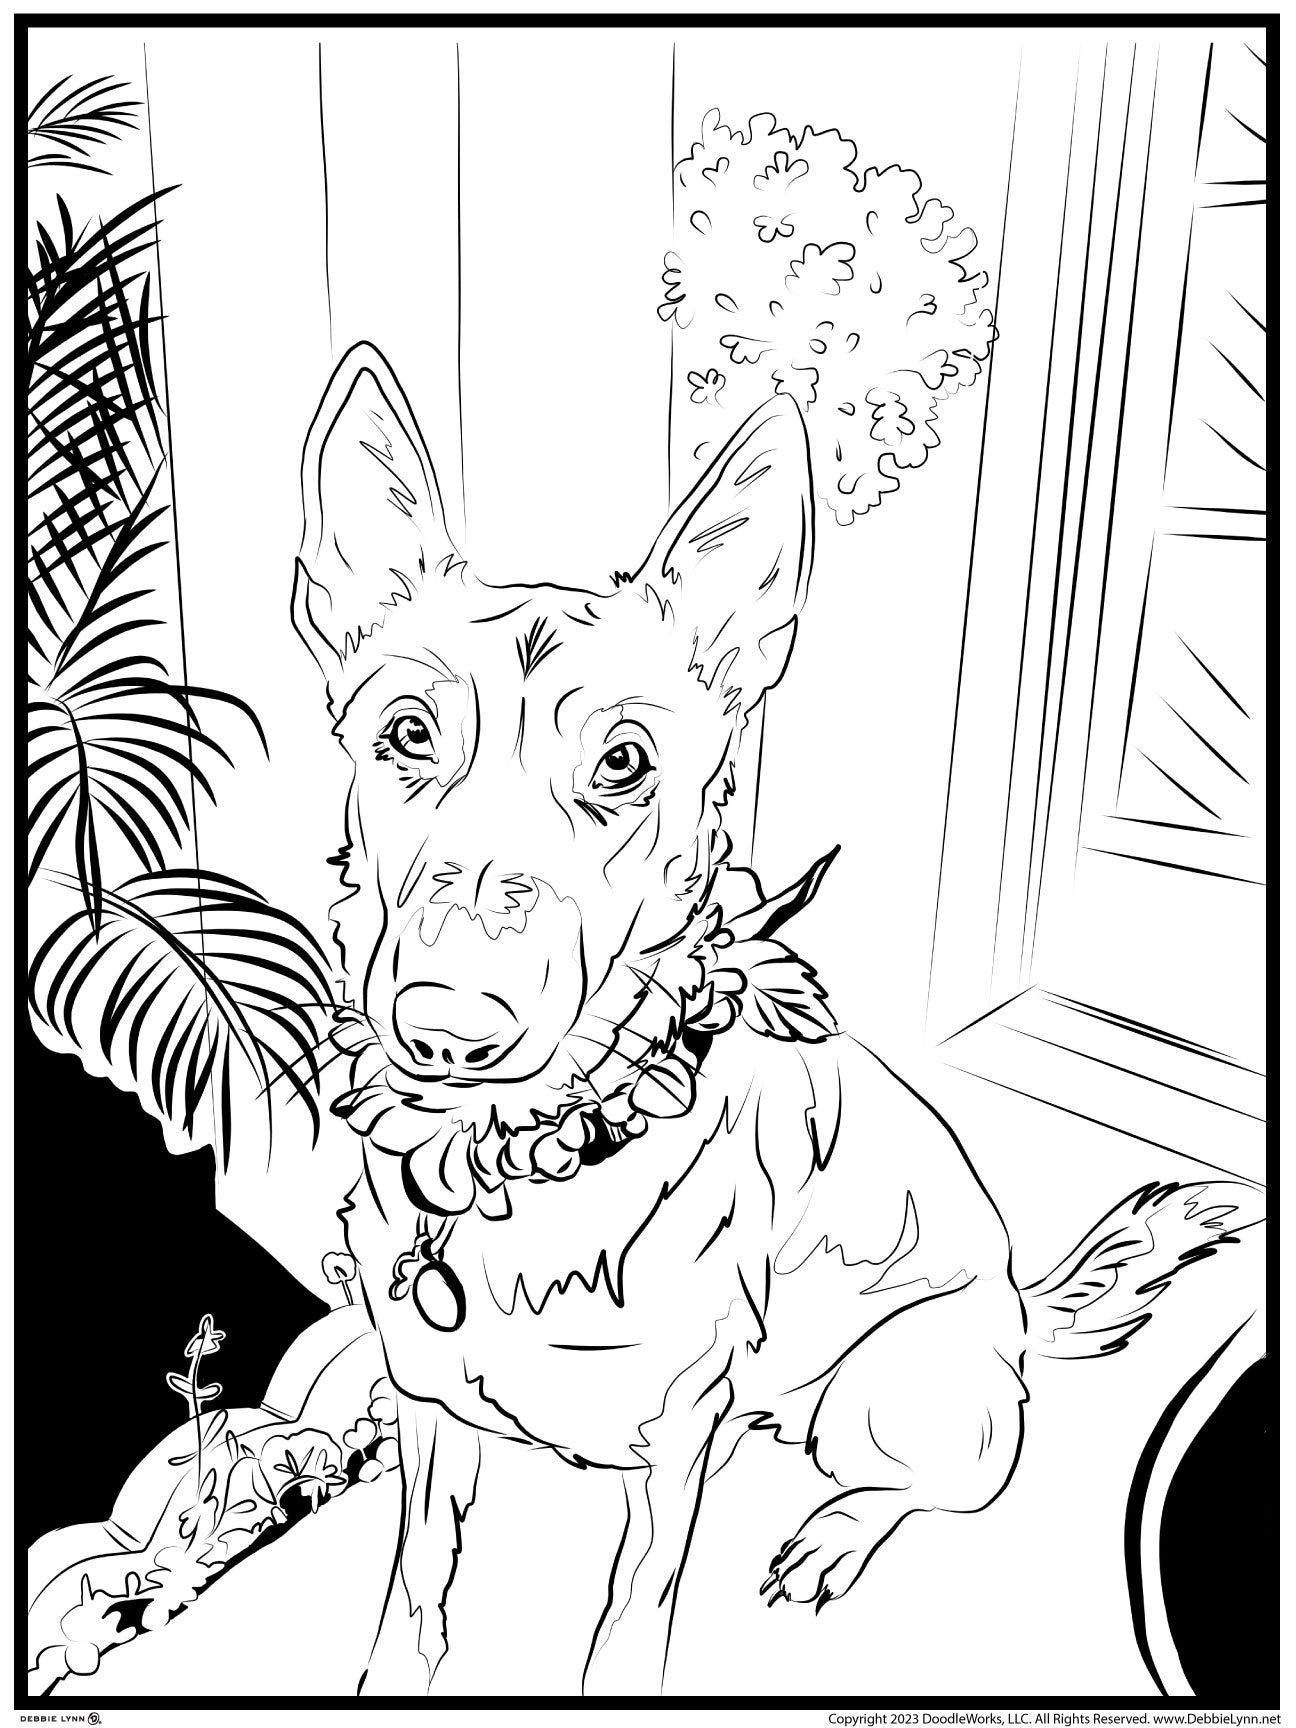 doberman coloring pages